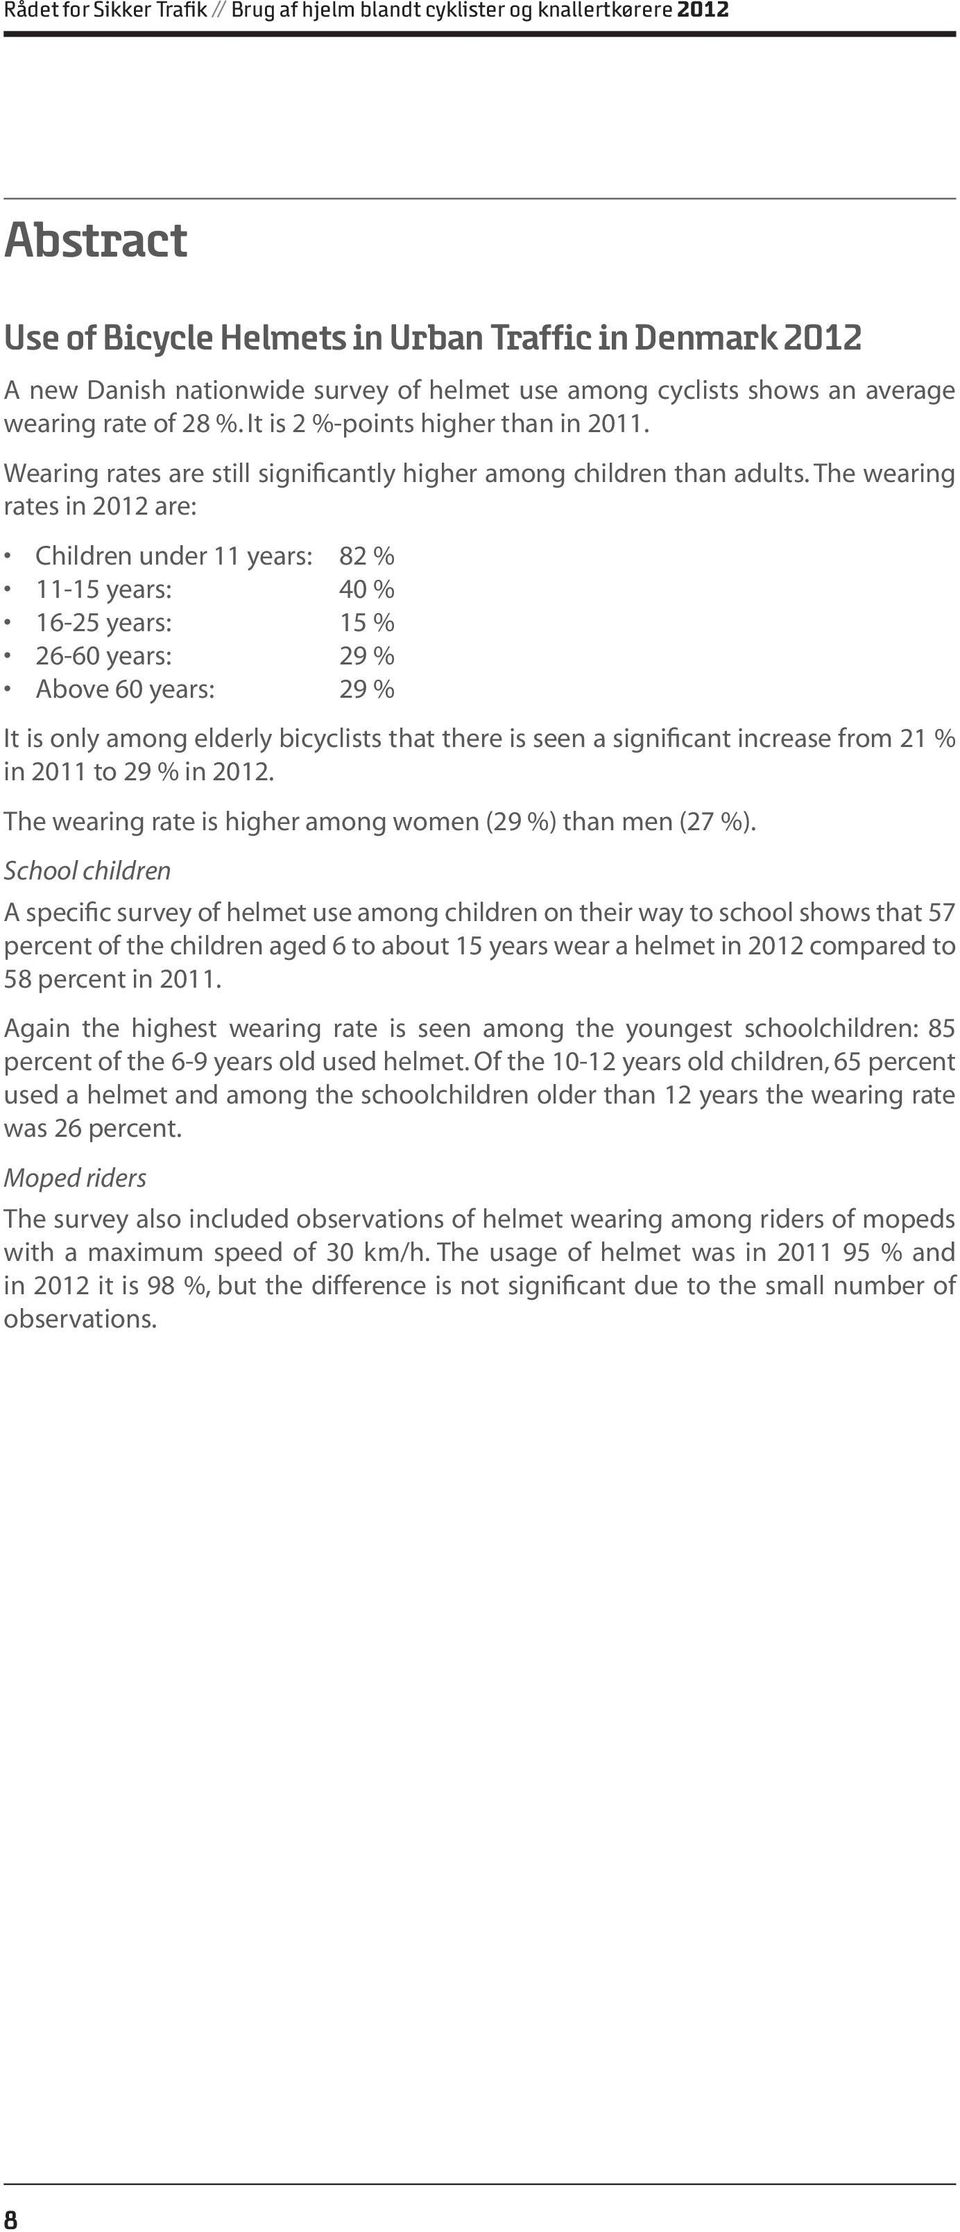 The wearing rates in 2012 are: Children under 11 years: 82 % 11-15 years: 40 % 16-25 years: 15 % 26-60 years: 29 % Above 60 years: 29 % It is only among elderly bicyclists that there is seen a